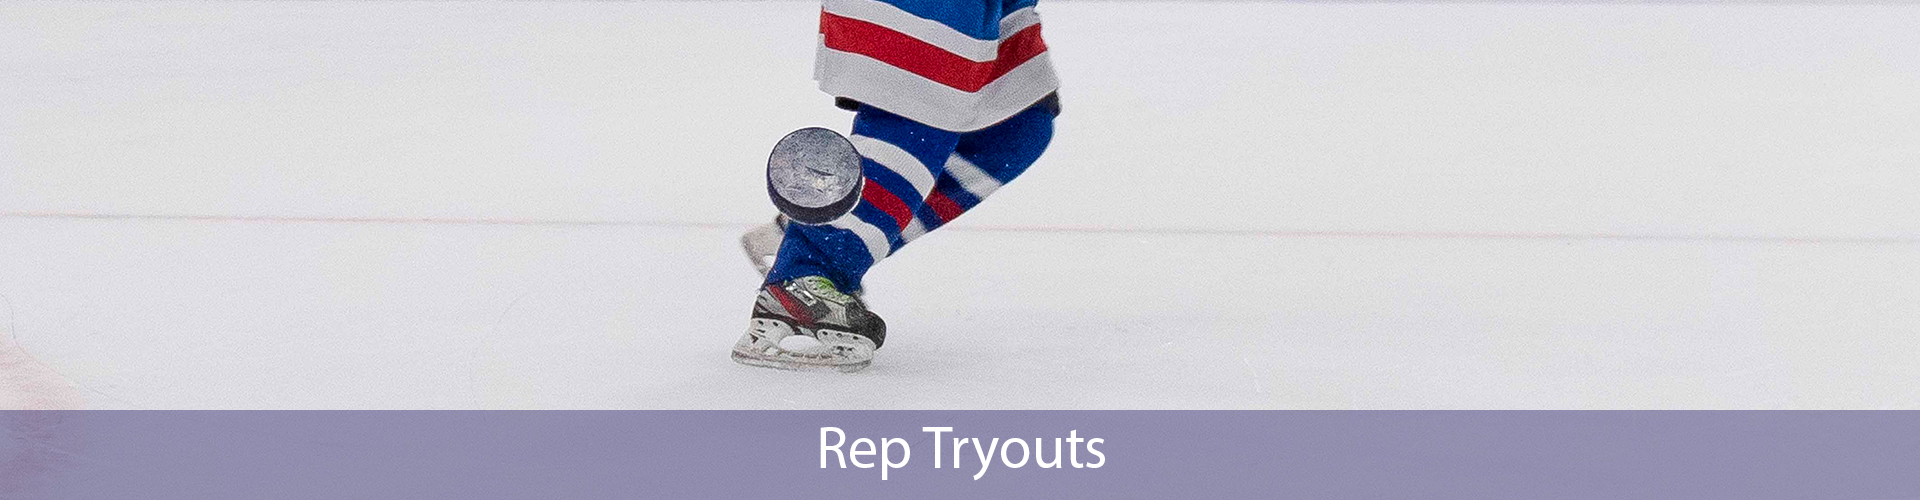 h-reptryouts